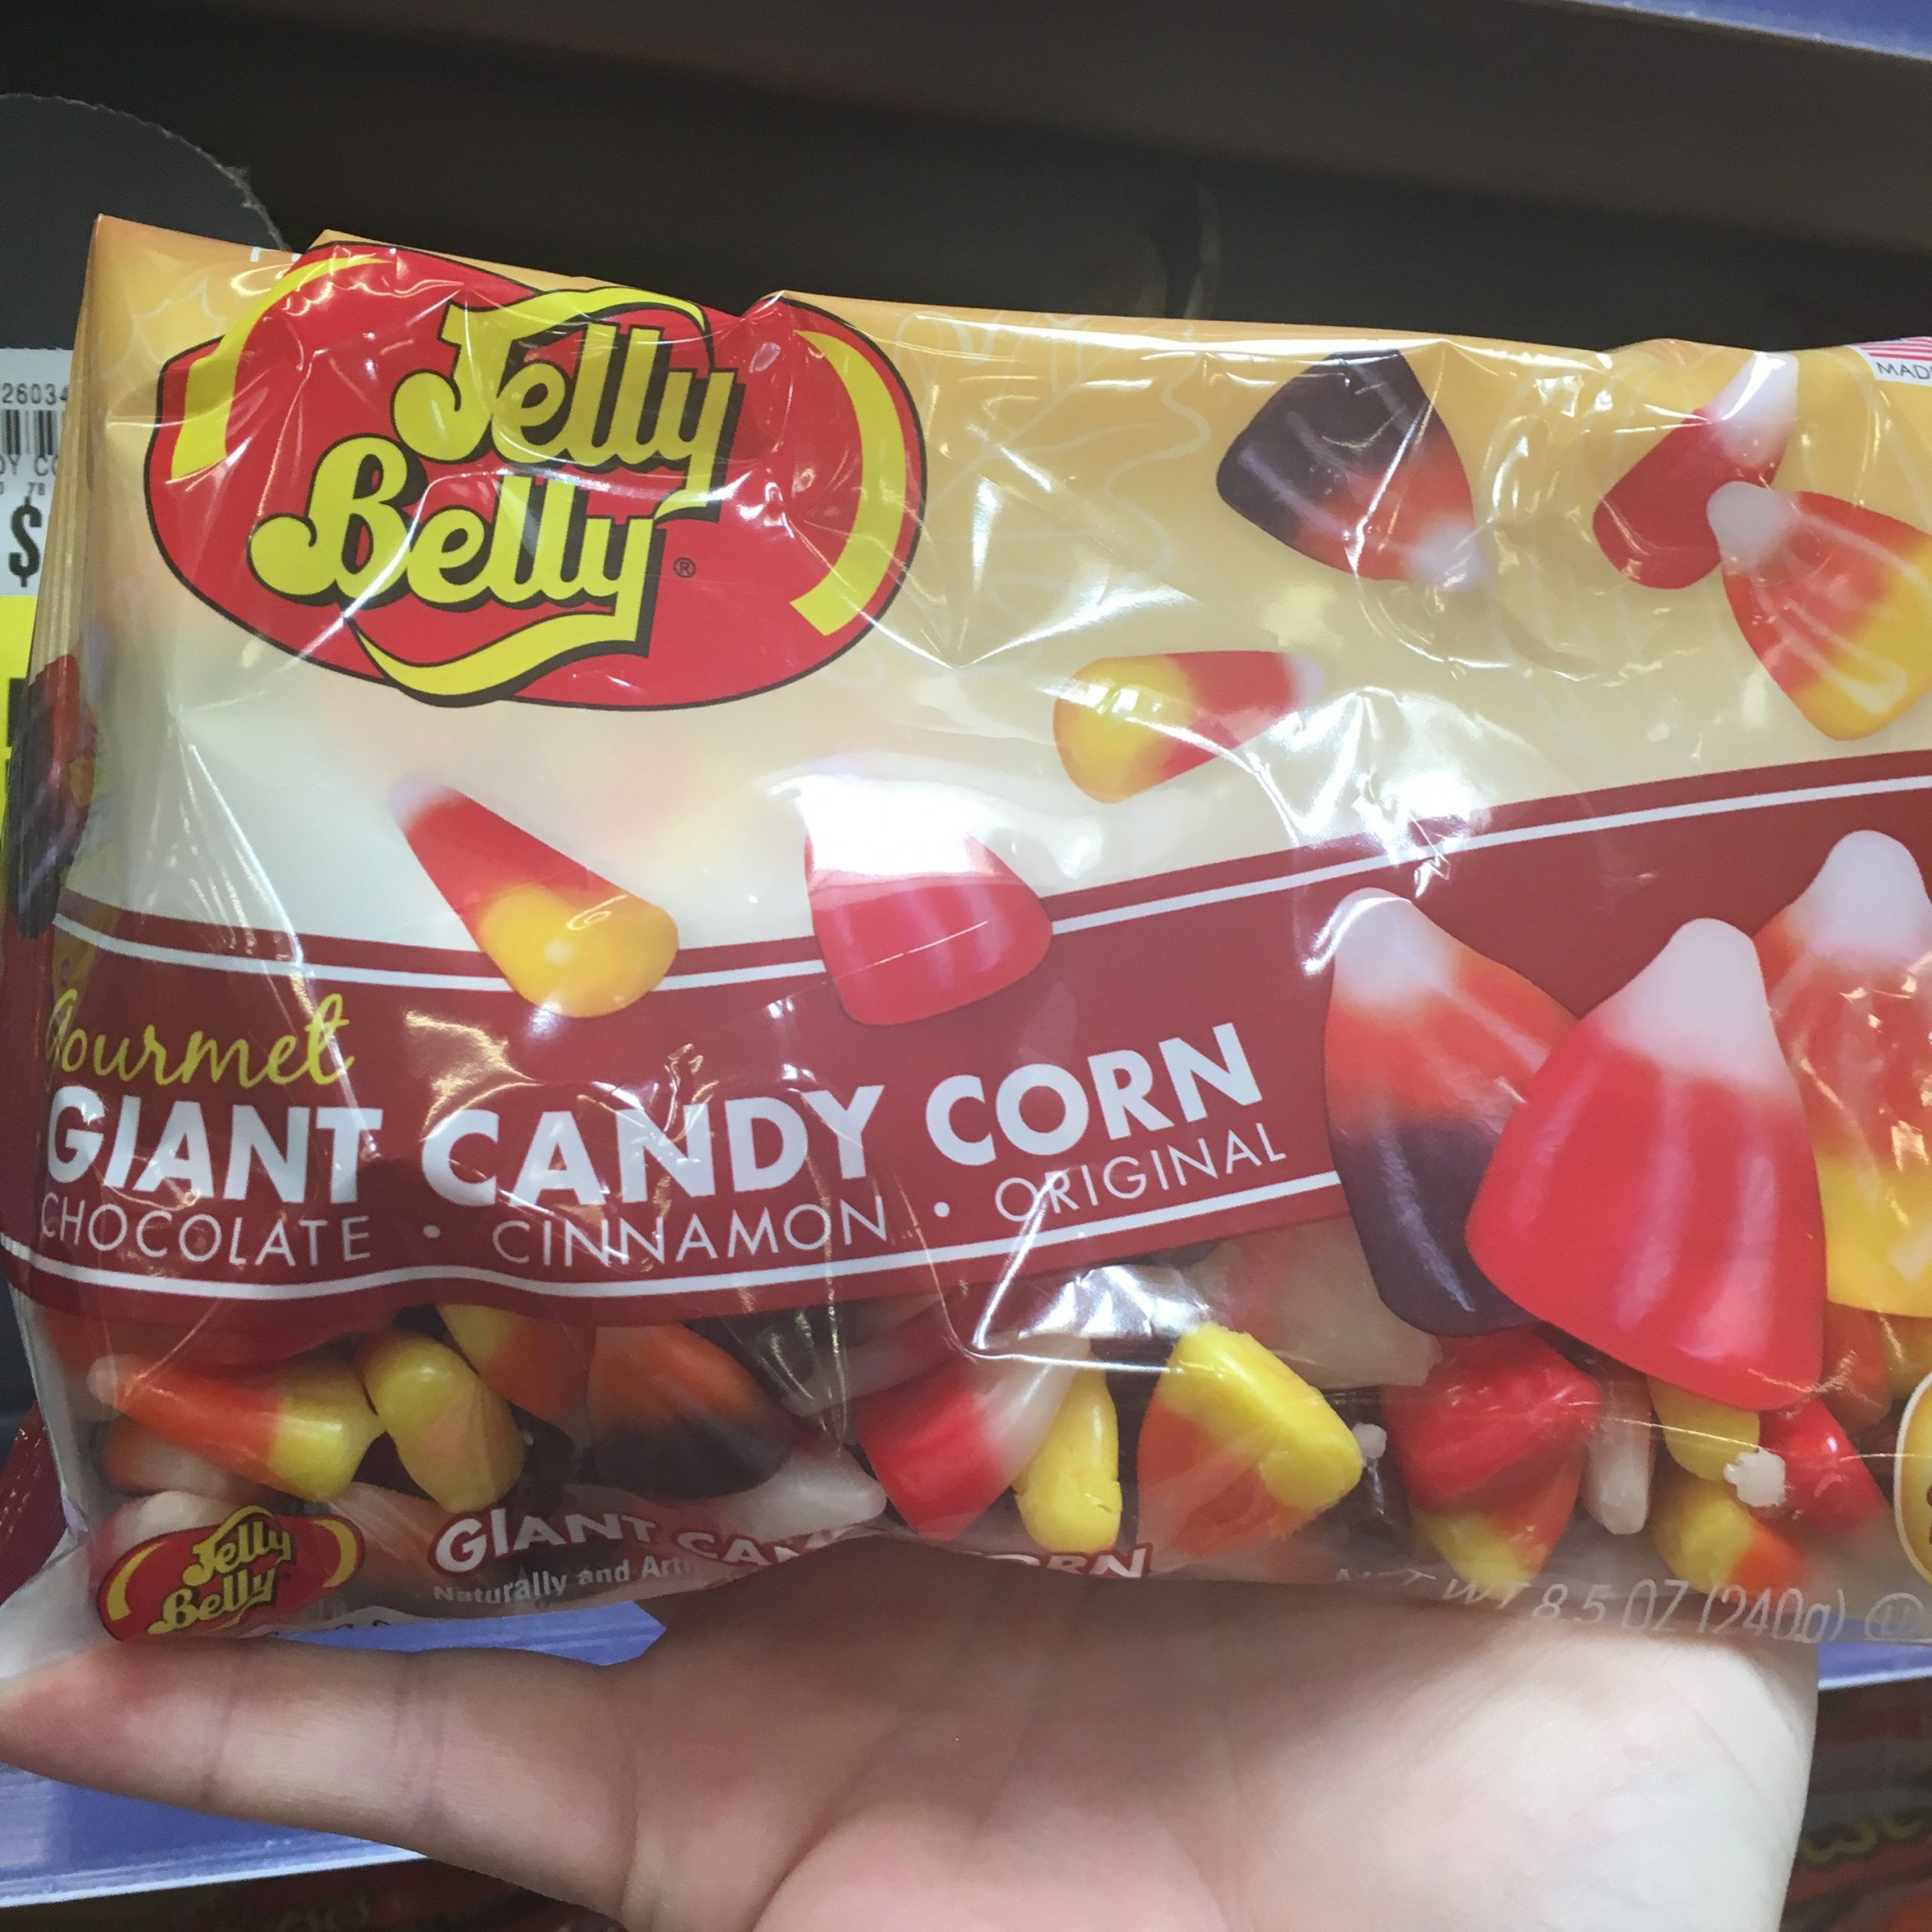 Jelly Belly Candy Corn
 Found Jelly Belly Giant Candy Corn Snack Gator